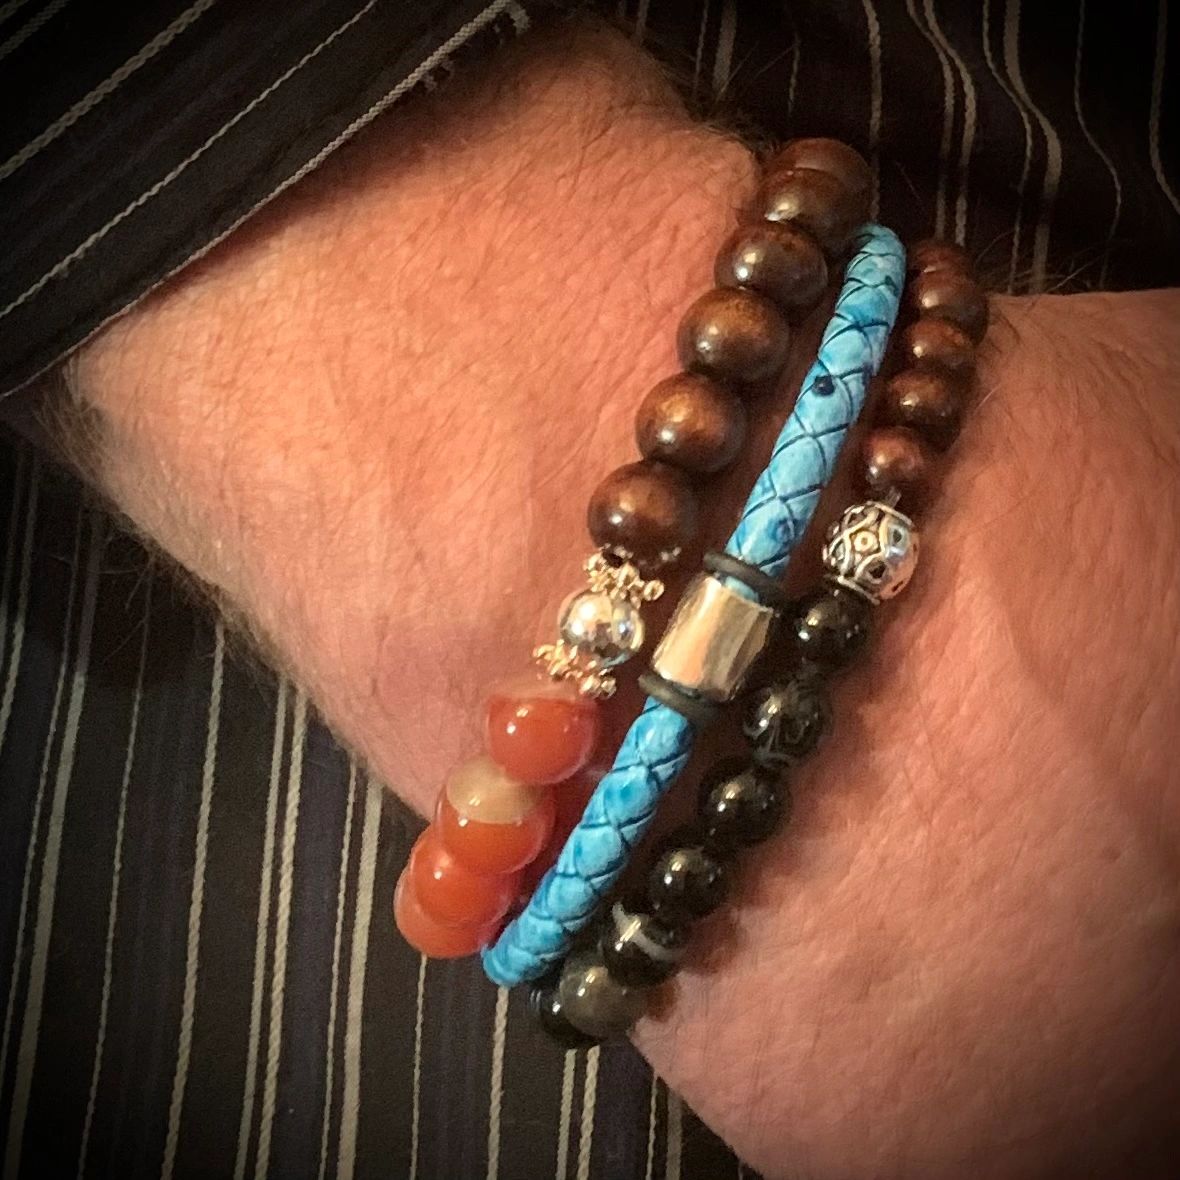 Coming soon! New Men’s Bracelet Collection!